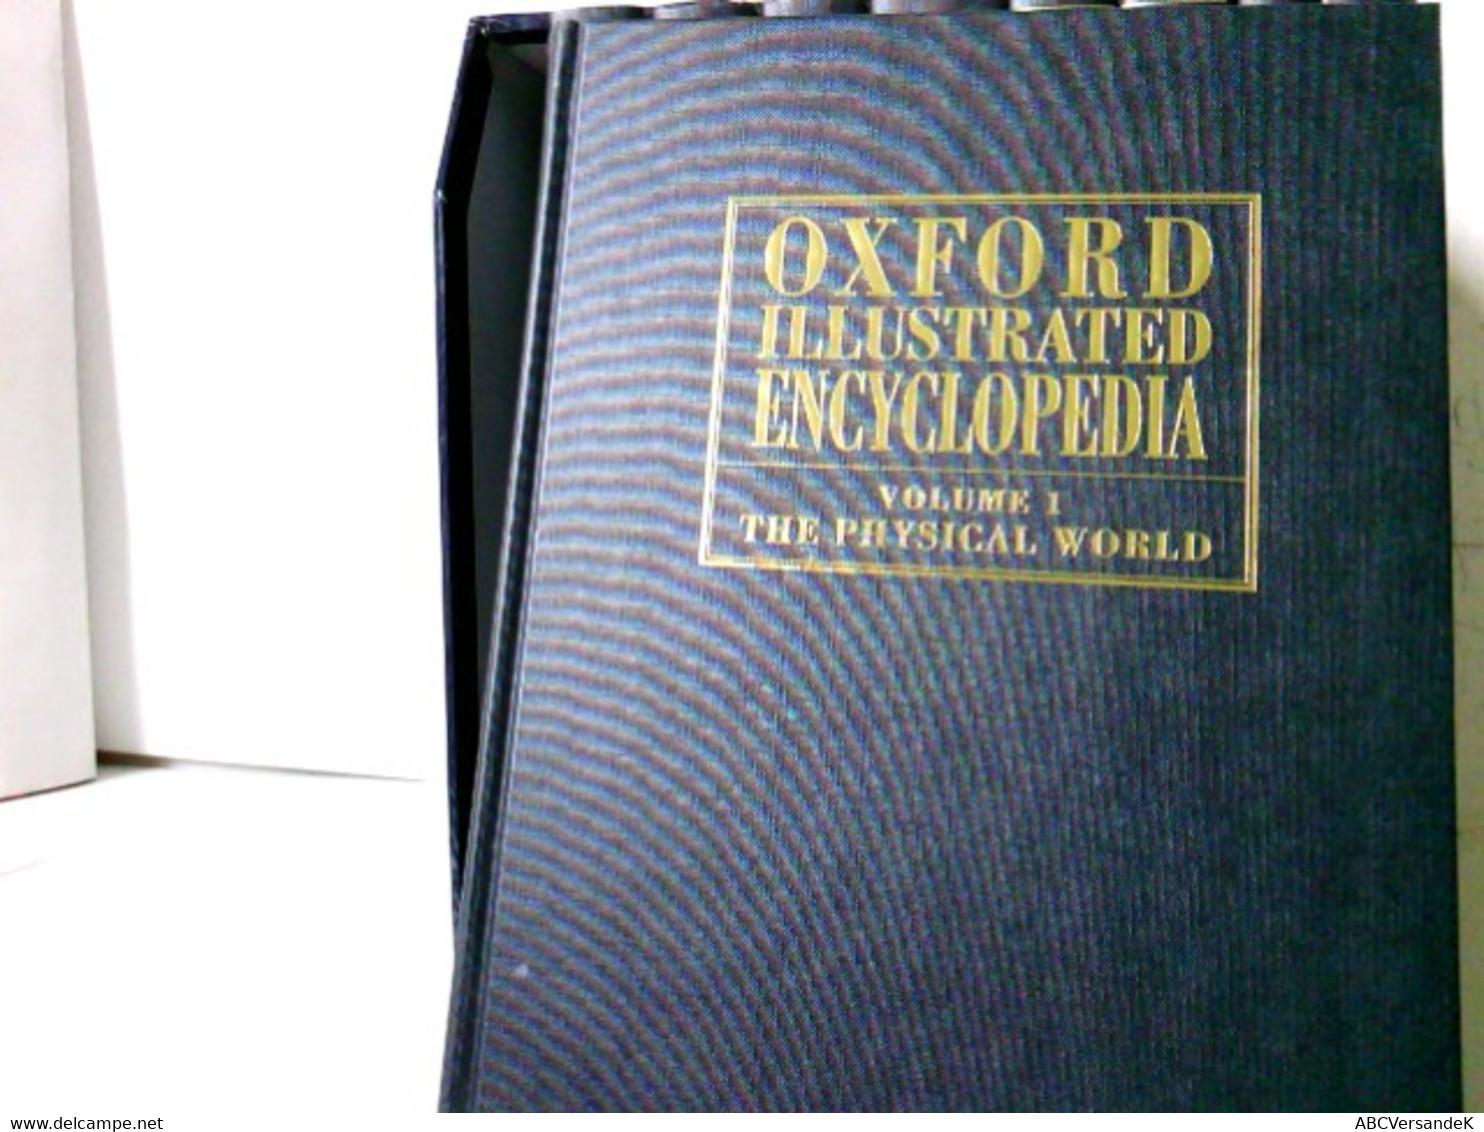 Oxford Illustrated Encyclopedia - 9 Bände (komplett): Volume 1: The Physical World / Volume 2: The Natural Wor - Glossaries